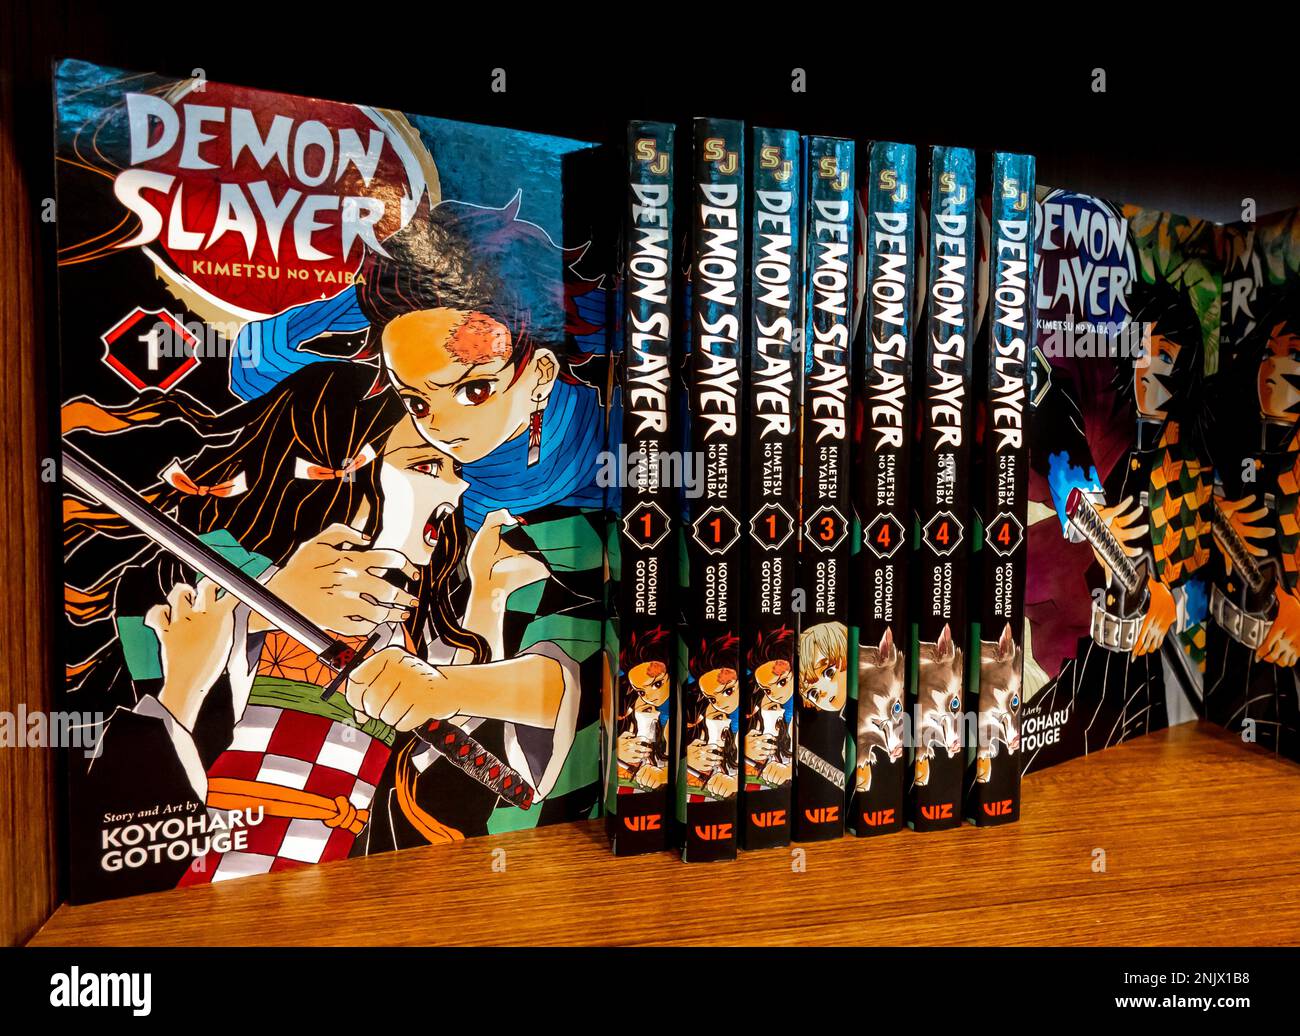 ANIME NEWS: First 'Demon Slayer' exhibition to open on March 20 in